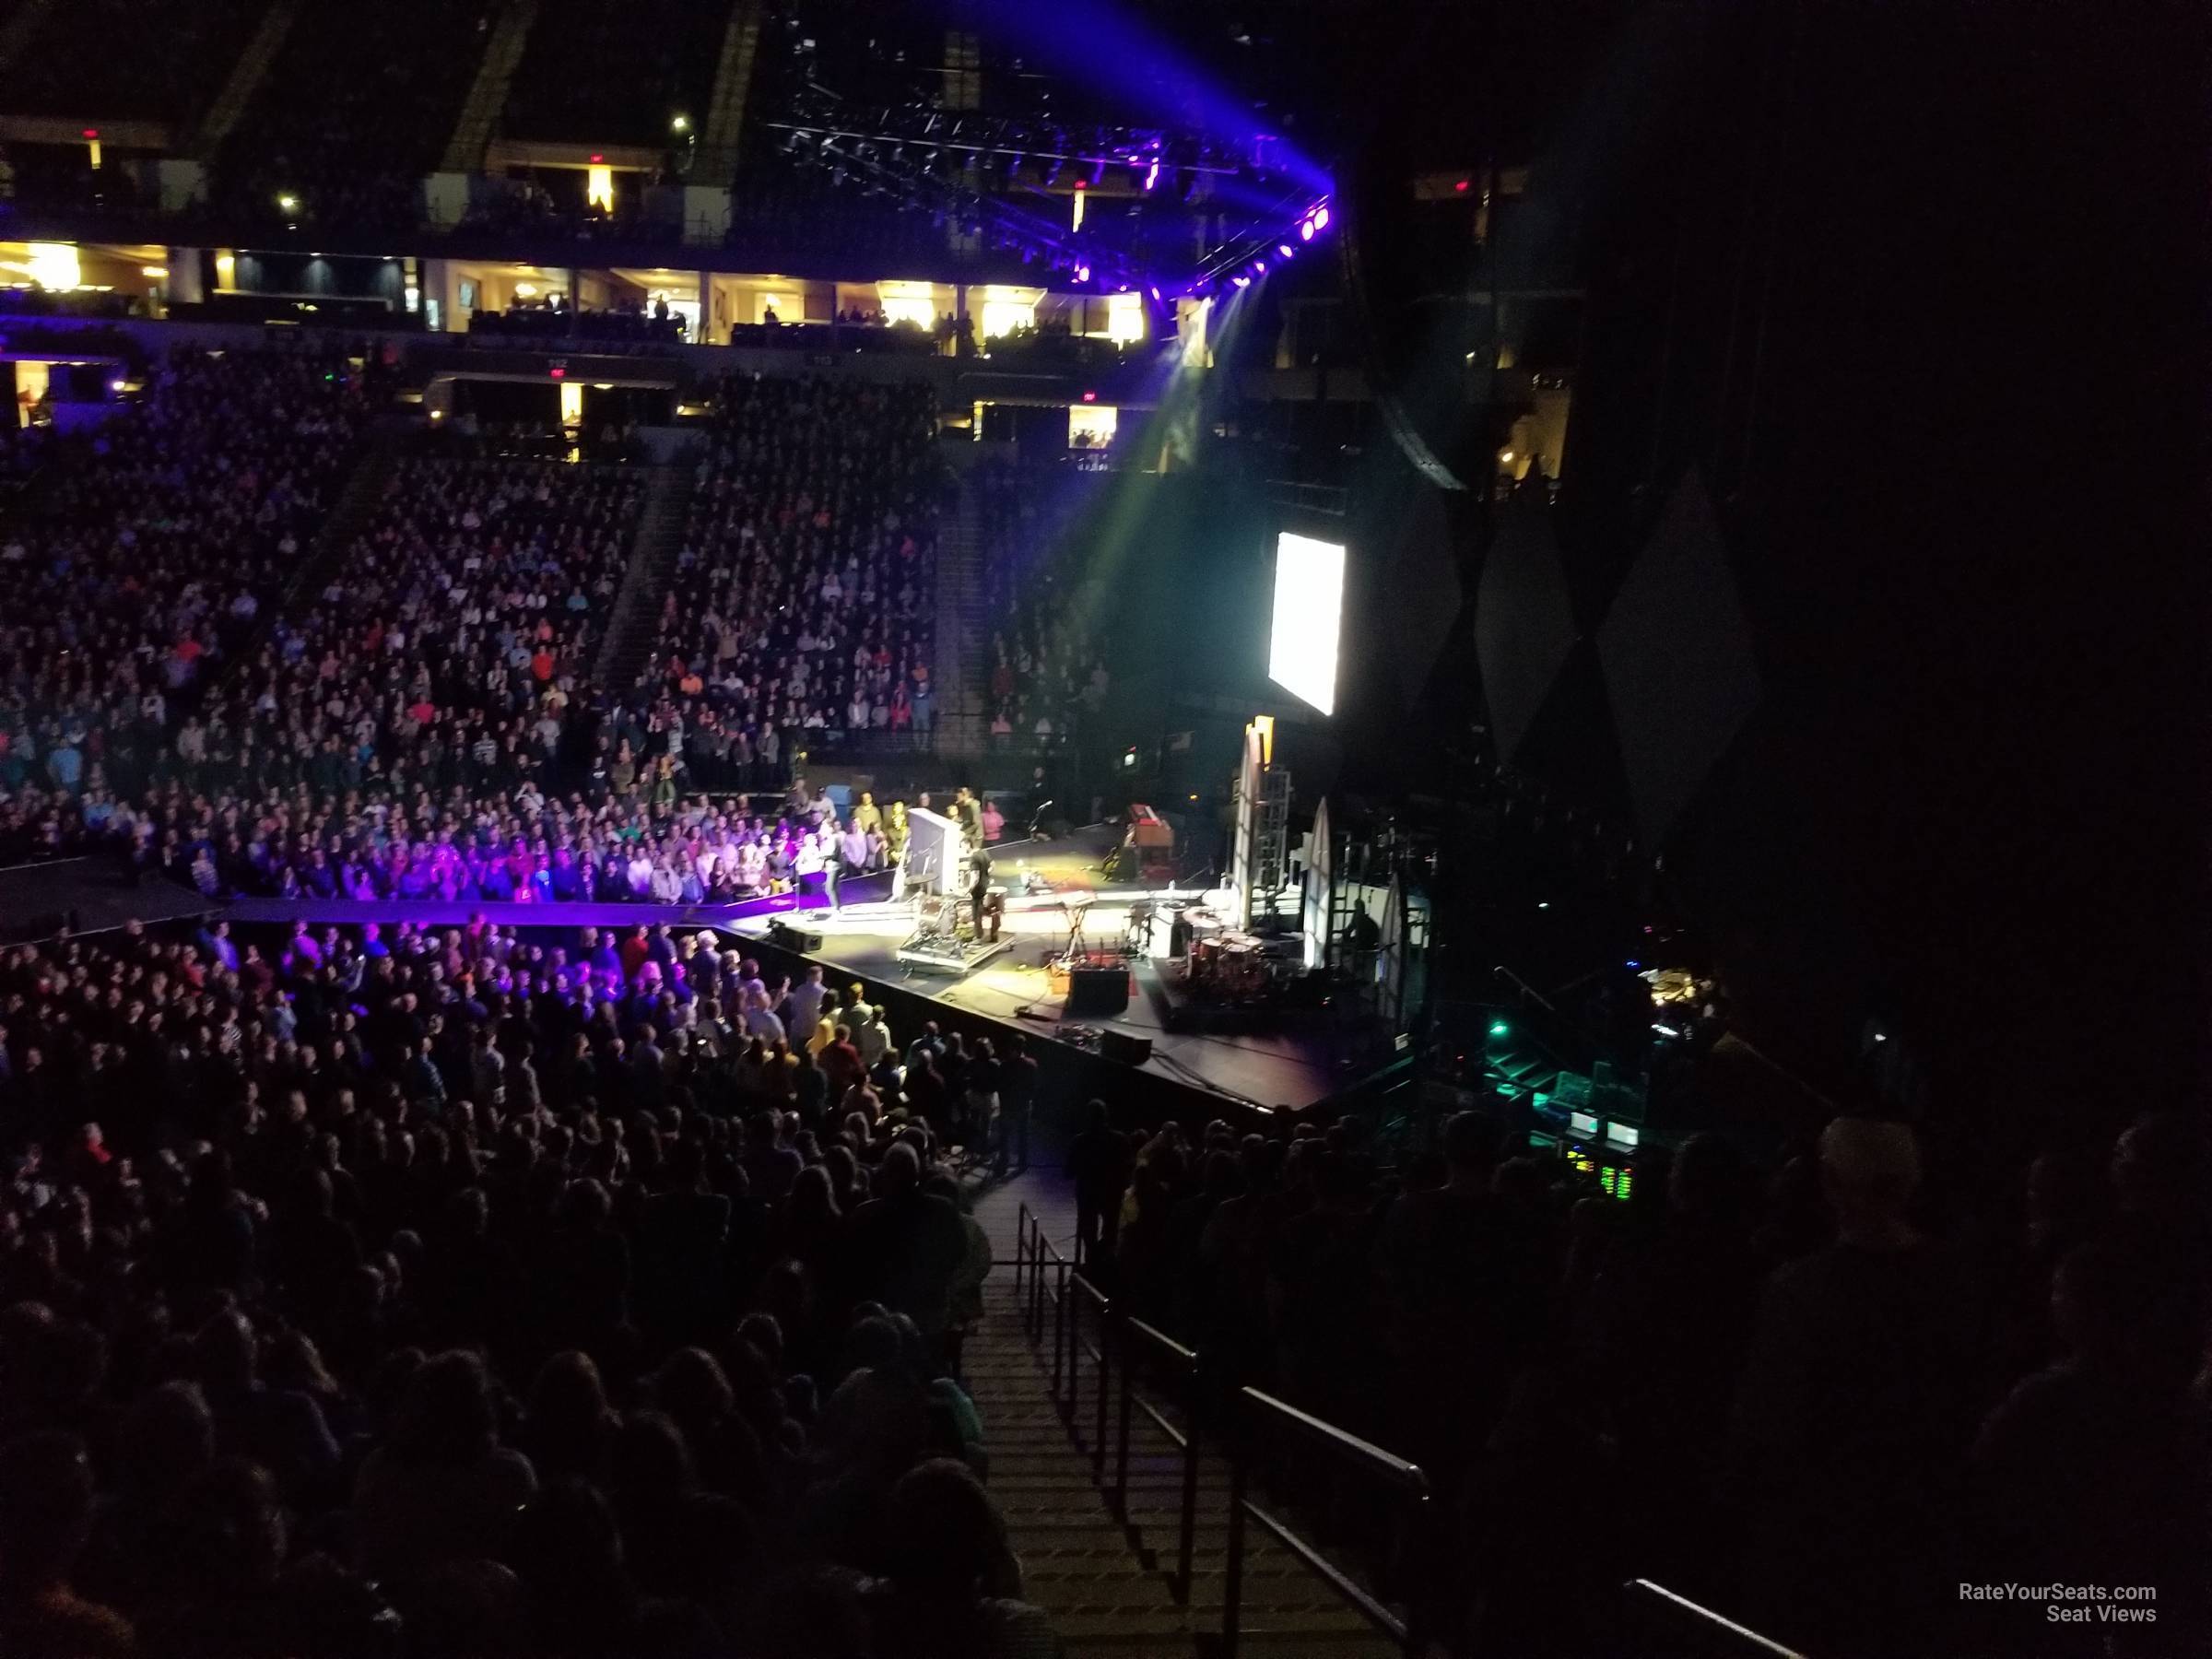 Section 129 at Target Center for Concerts - RateYourSeats.com